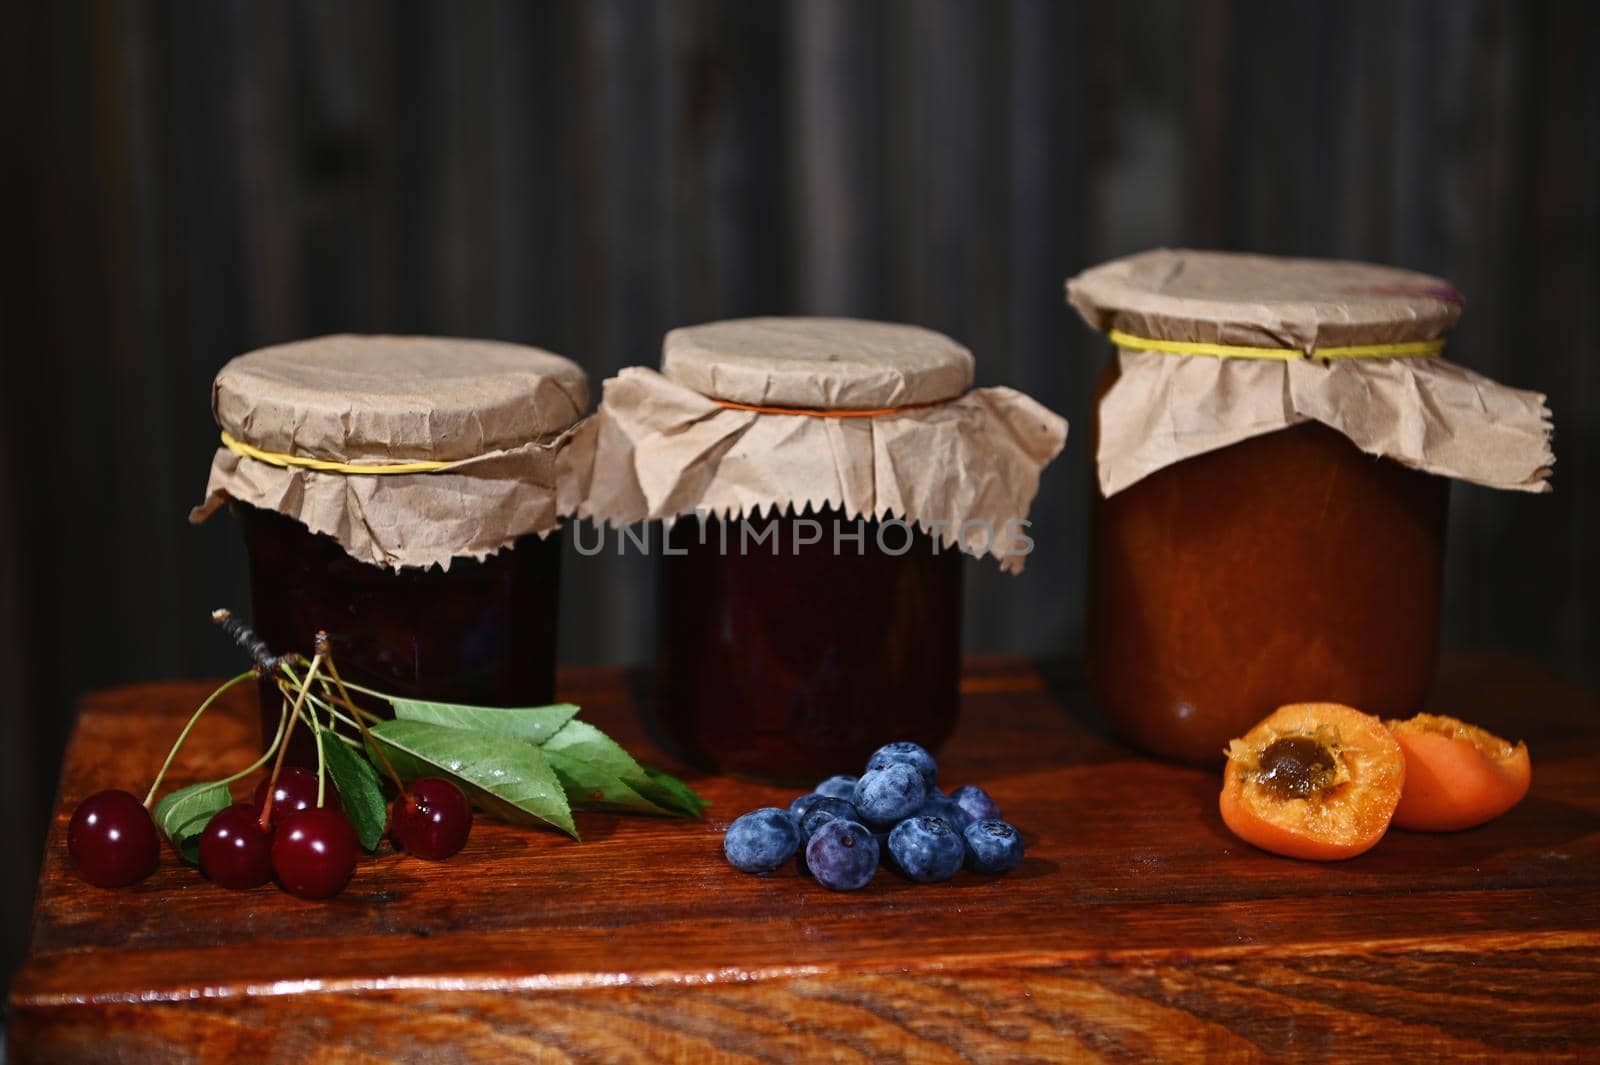 Assortment of homemade confitures of seasonal fruits and berries on rustic wooden background. Canning, preparation of preserved food for winter season. Still life, copy ad space